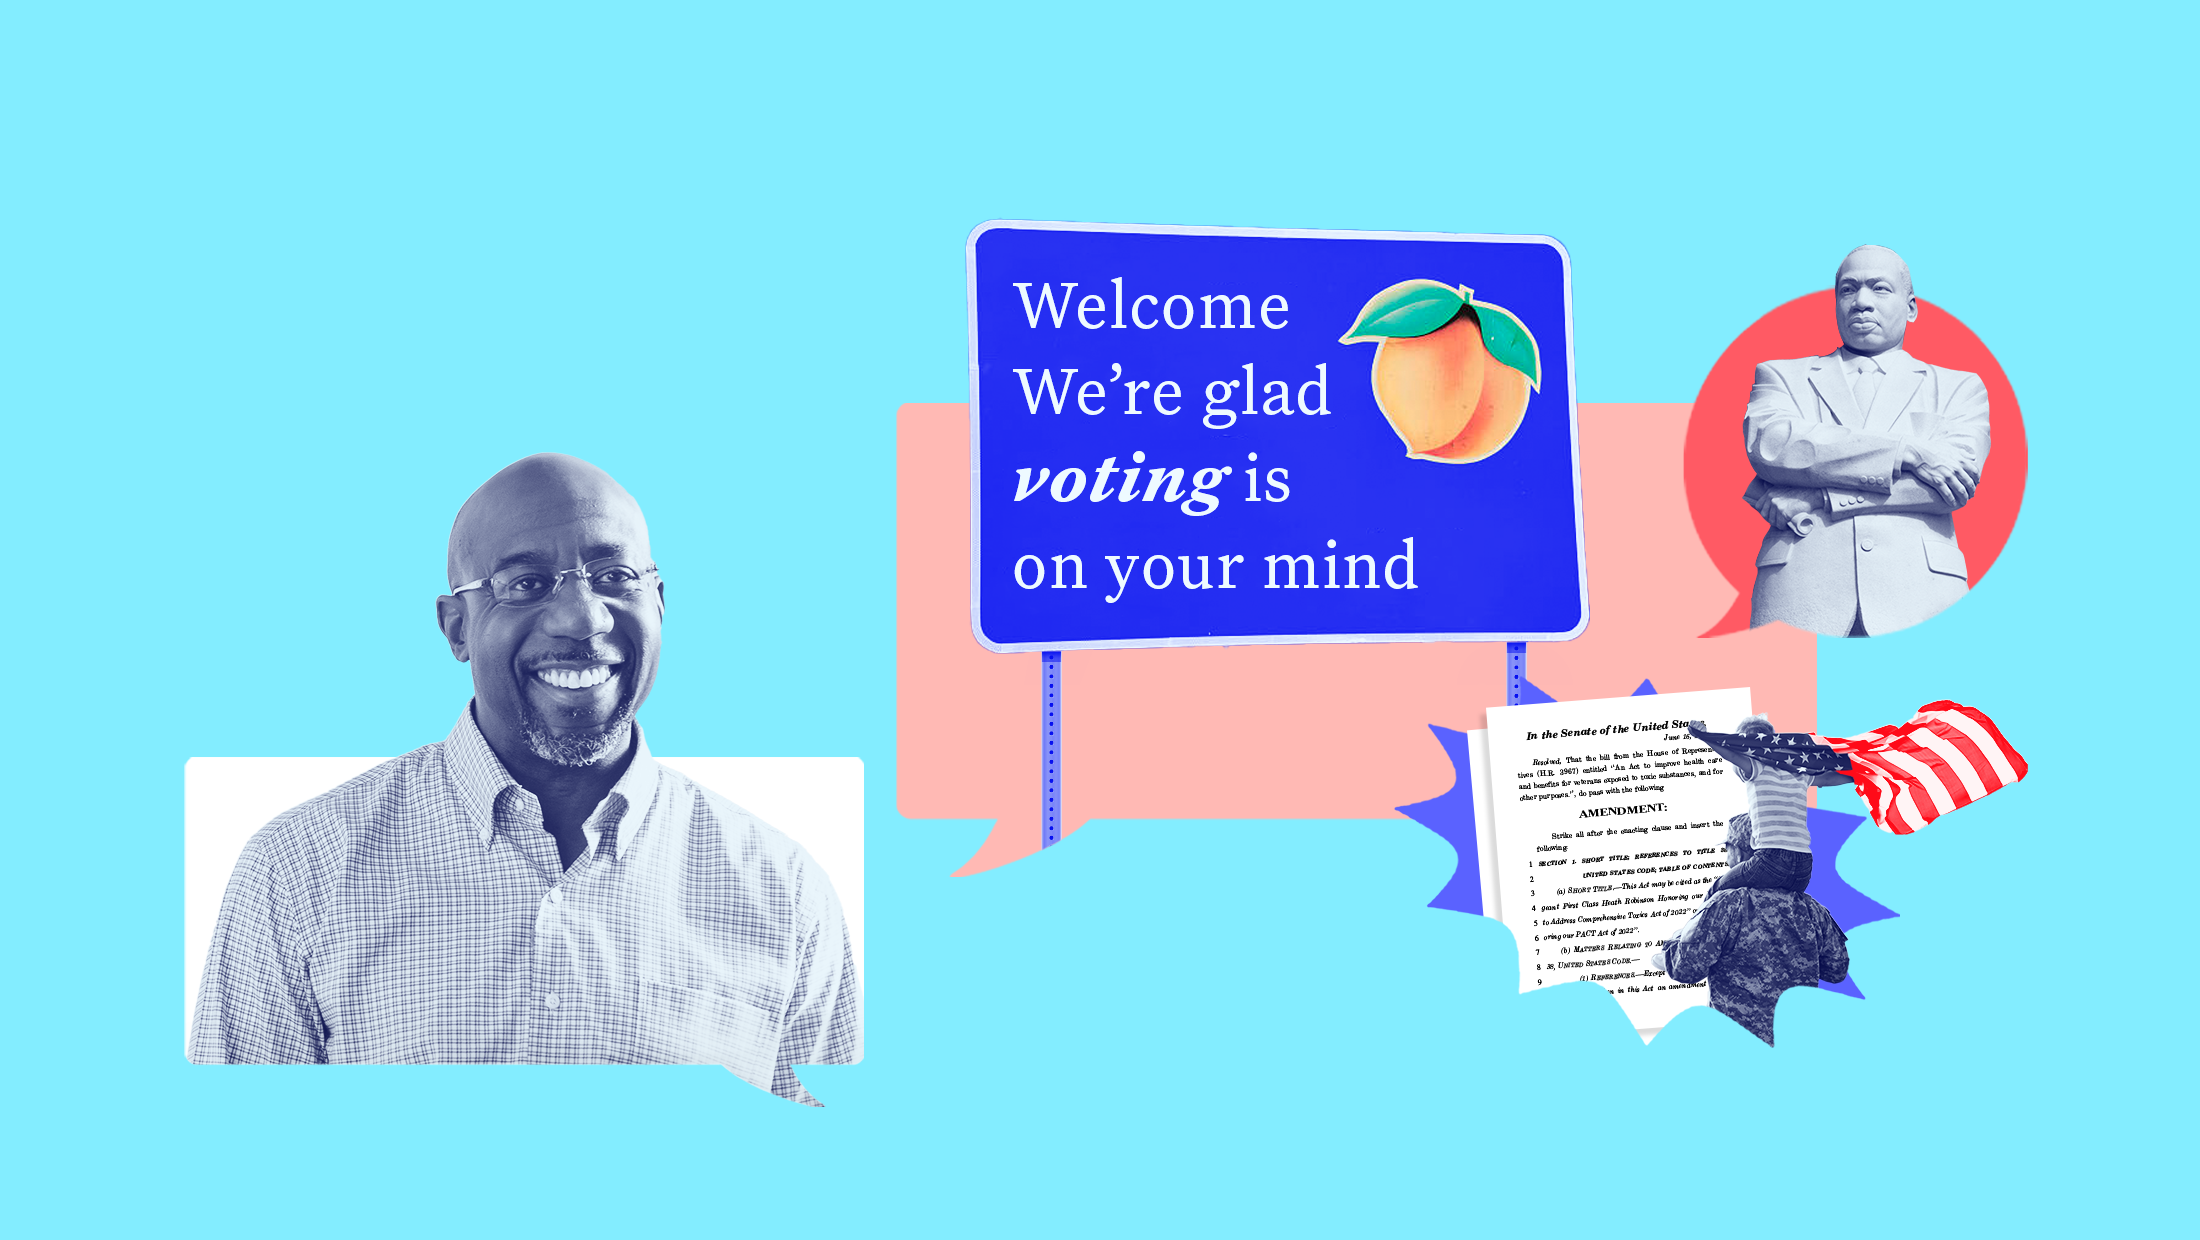 Light blue background with dark blue-toned image of Sen. Raphael Warnock, a blue sign that reads "Welcome We're glad voting is on your mind" in front of a pink text bubble, an image of a statue of Martin Luther King, Jr. in front of a red text bubble, the bill text of the Honoring our PACT Act, and an image of a solider with a child on their shoulders holding an American flag.